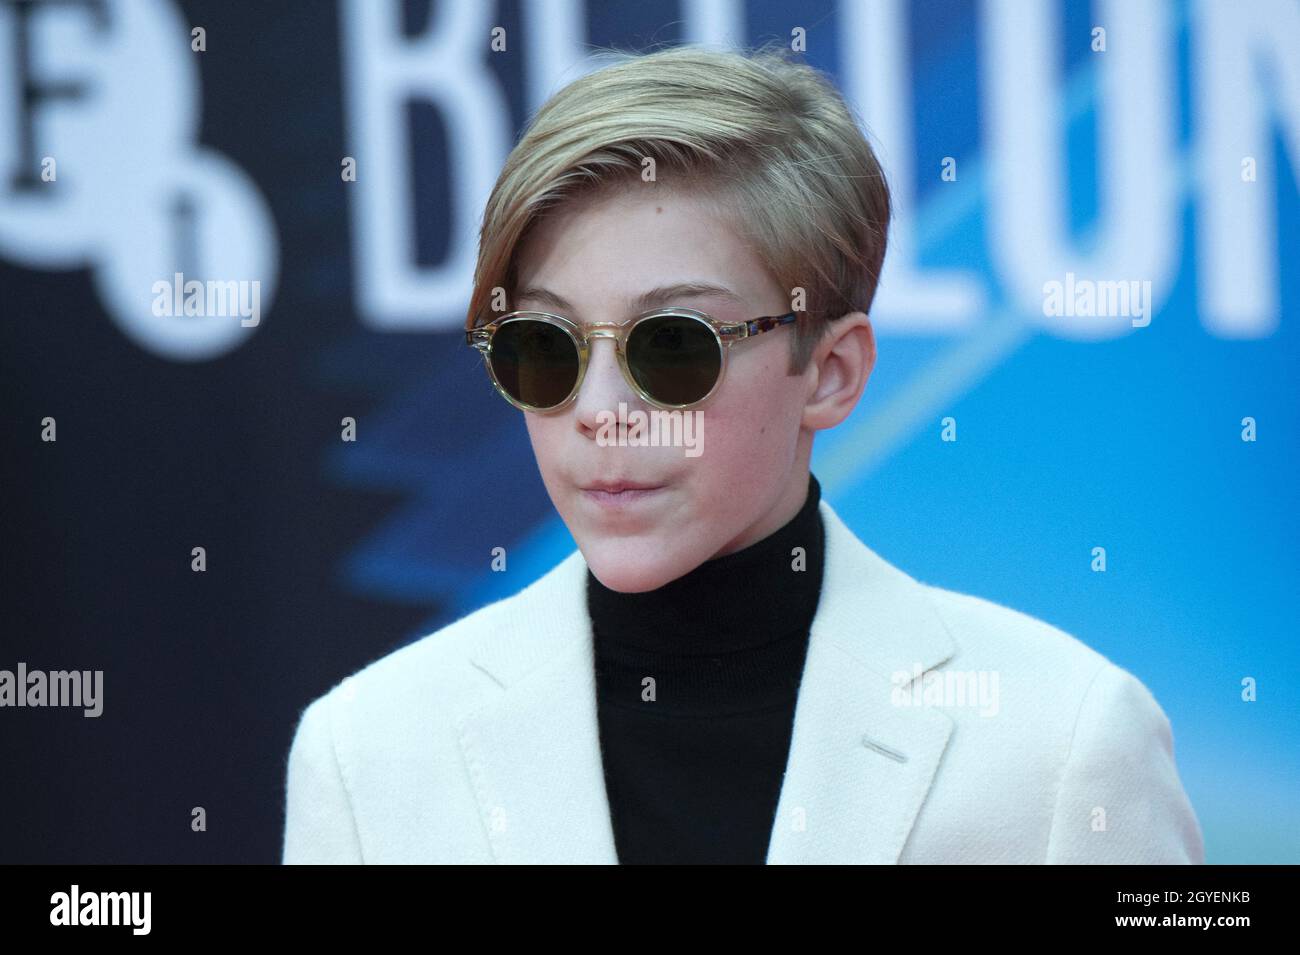 London, UK. Oct 7th 2021: Jack Nielen attending the Spencer Premiere as part of the 65th BFI London Film Festival at the Royal Festival Hall in London, England on October 07, 2021. Photo by Aurore Marechal/ABACAPRESS.COM Credit: Abaca Press/Alamy Live News Stock Photo